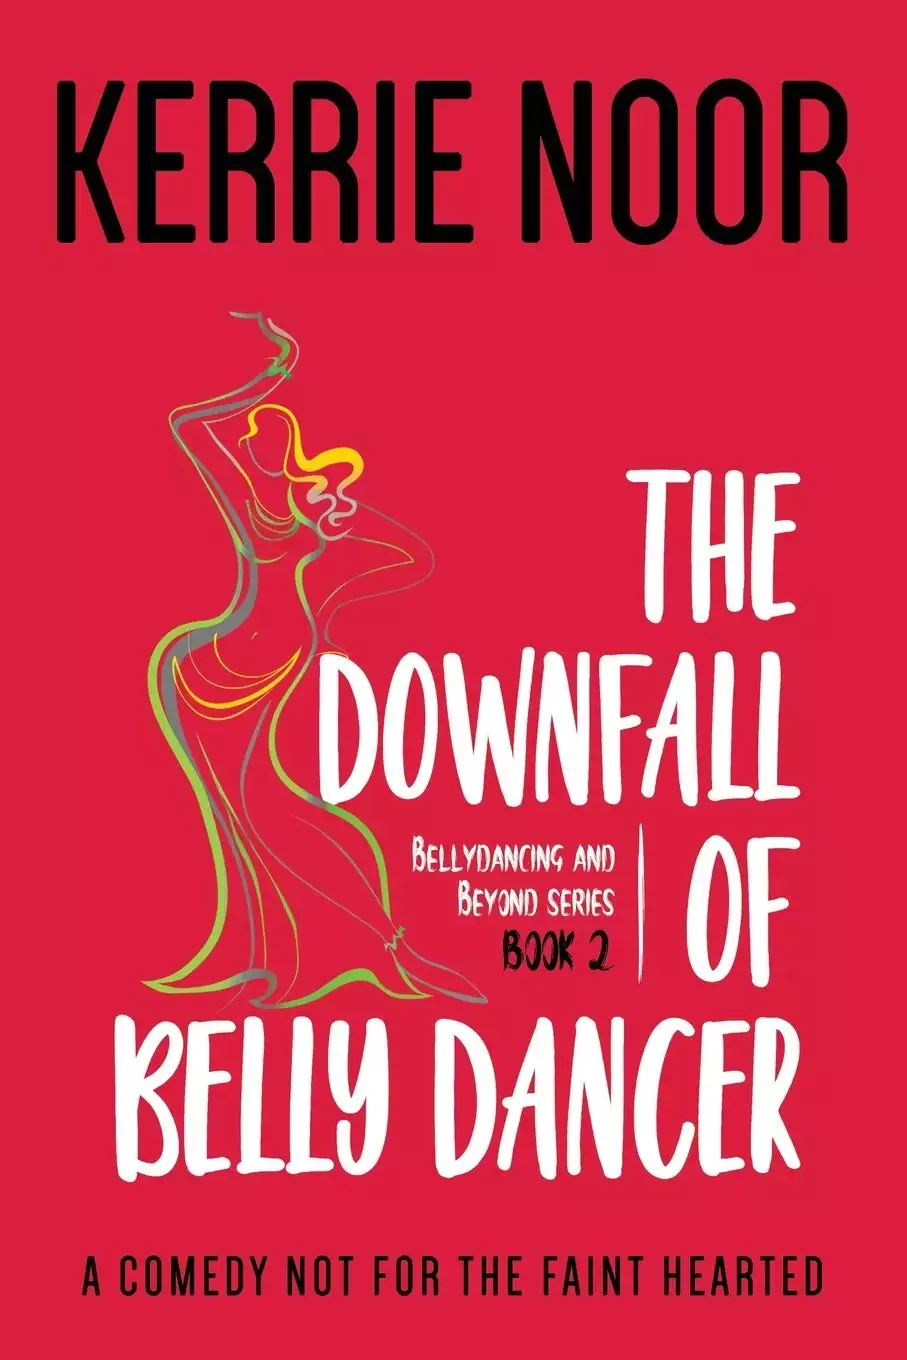 The Downfall Of A Bellydancer: A Comedy Not For The Fainthearted